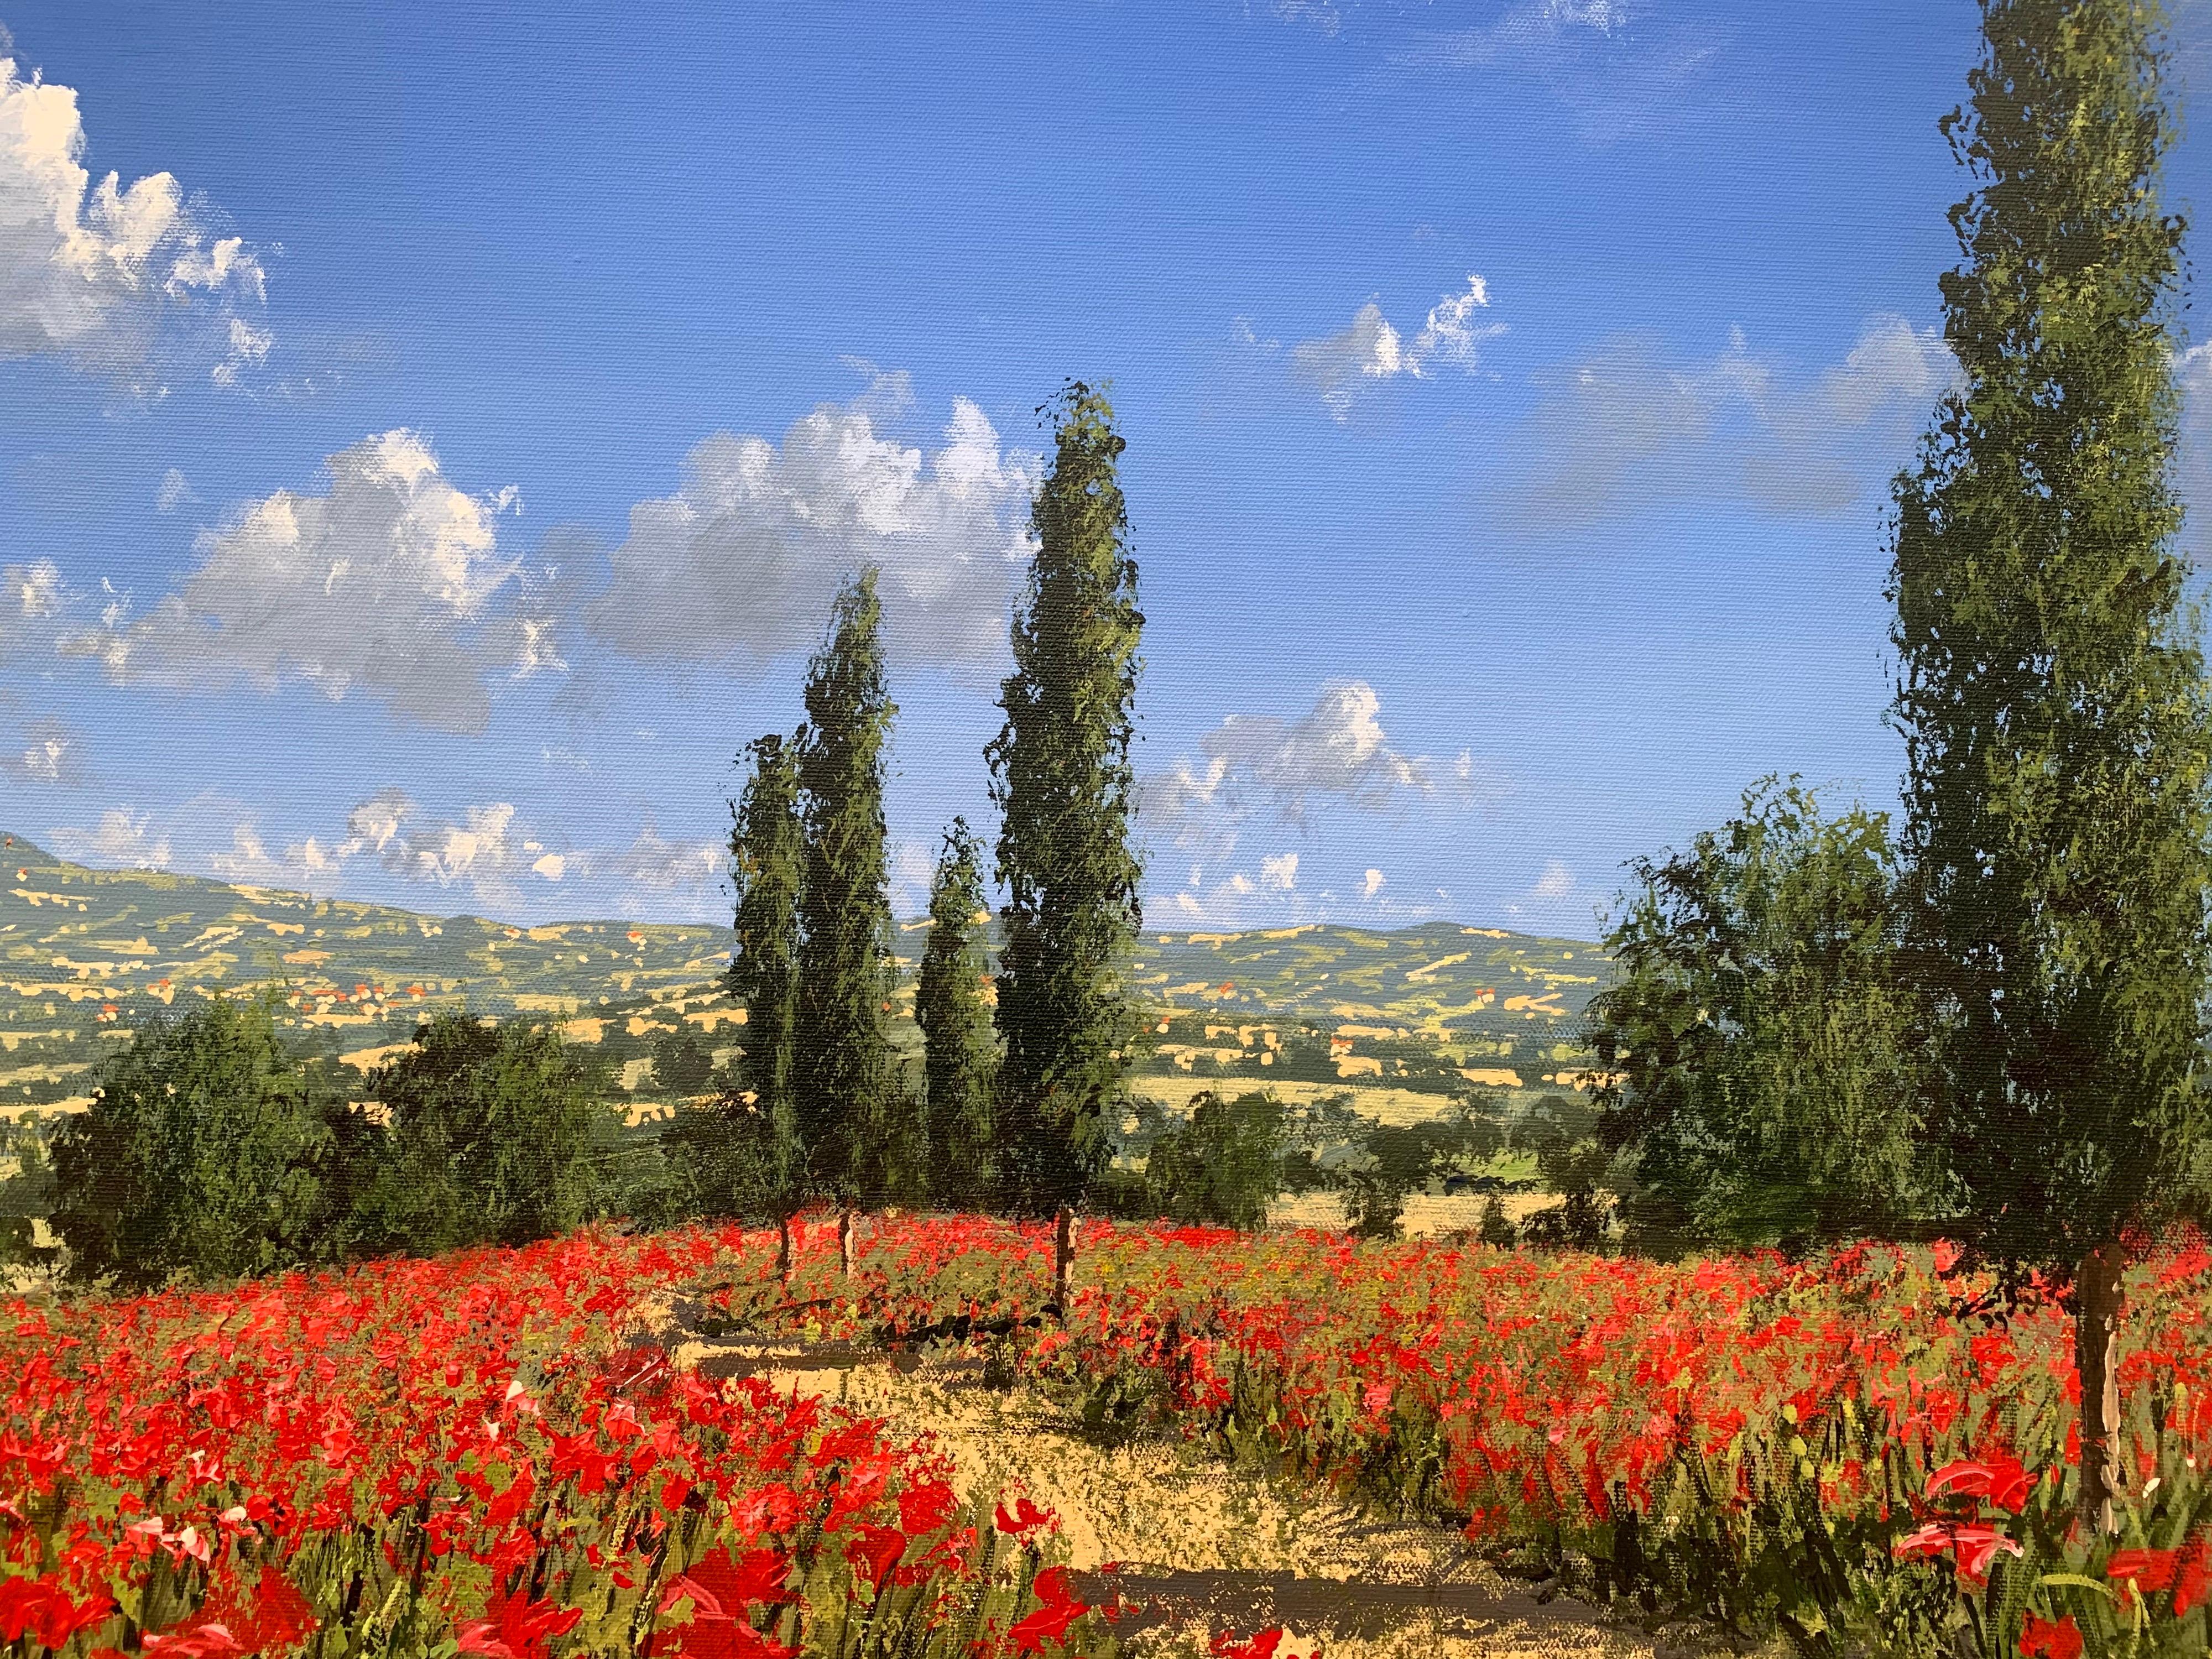 Bright Red Poppy Field in the Sunshine in Europe by Contemporary British Artist - Blue Figurative Painting by Tim Layzell